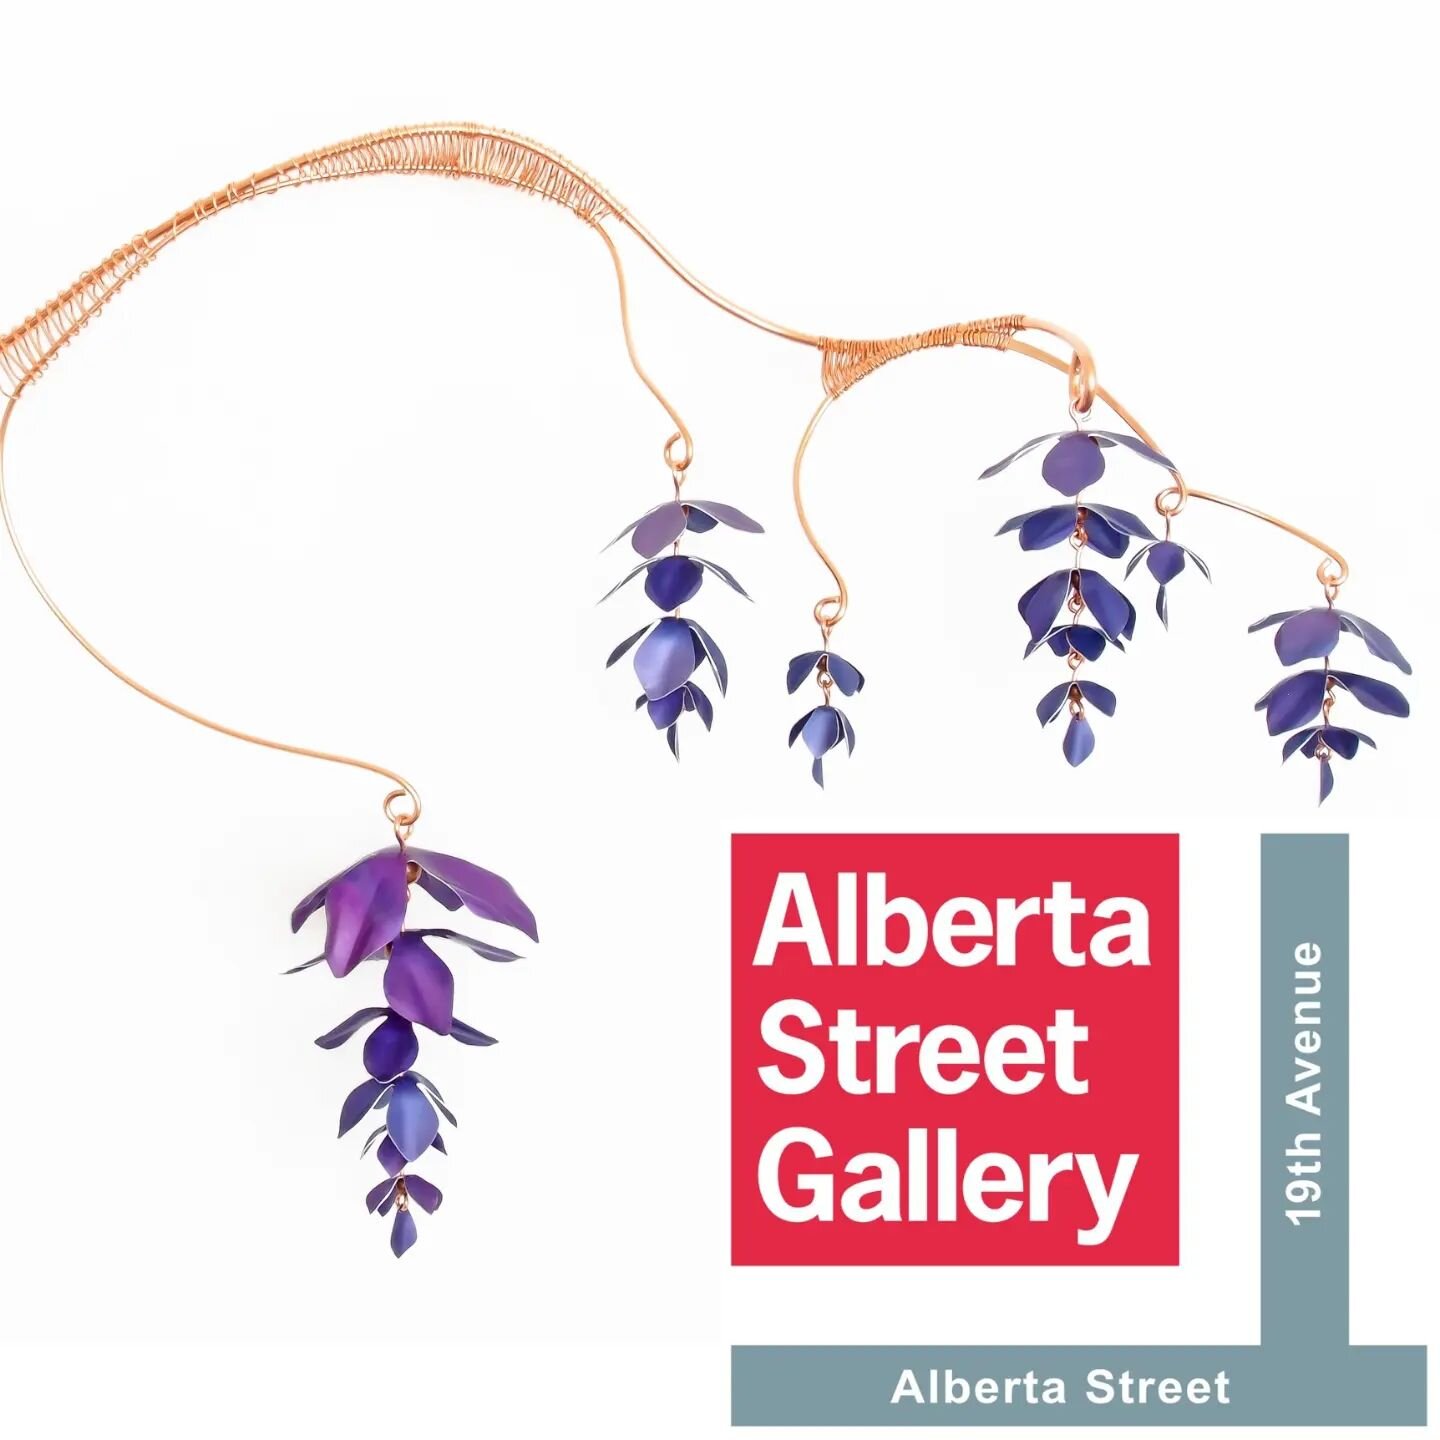 It's the last weekend to check out my show @albertastreetgallery I've sold a few pieces, but there's still plenty to see.
.
.
#sculpture #homedecor #metalart #aluminumsculpture #anodizedaluminum #allenmetalarts #floralart #botanicalart #albertastreet